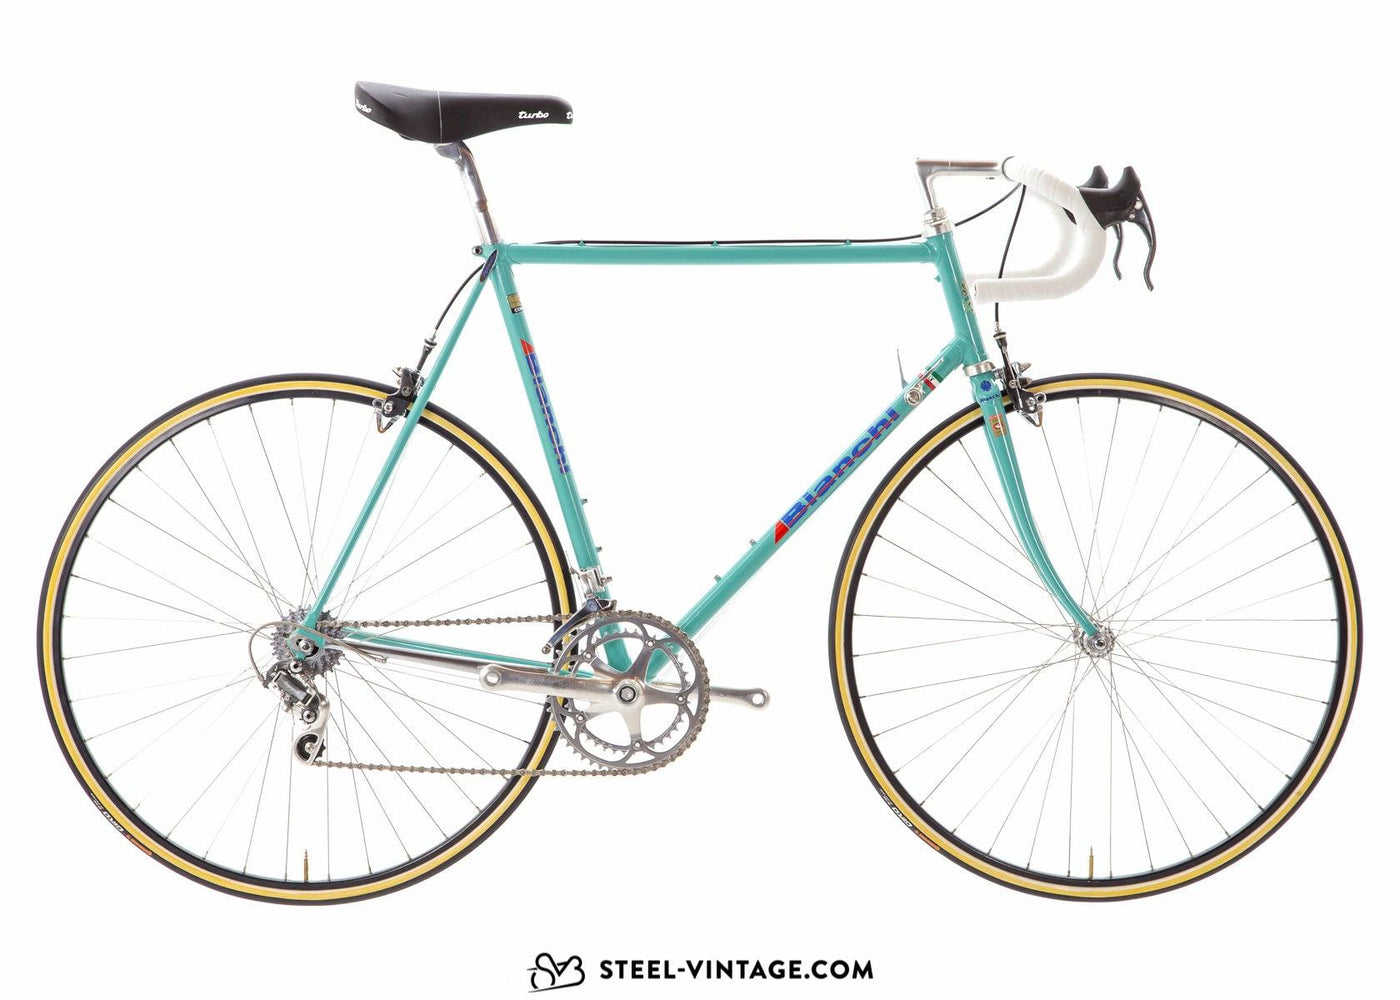 Bianchi Mondiale Classic Road Bicycle 1980s - Steel Vintage Bikes